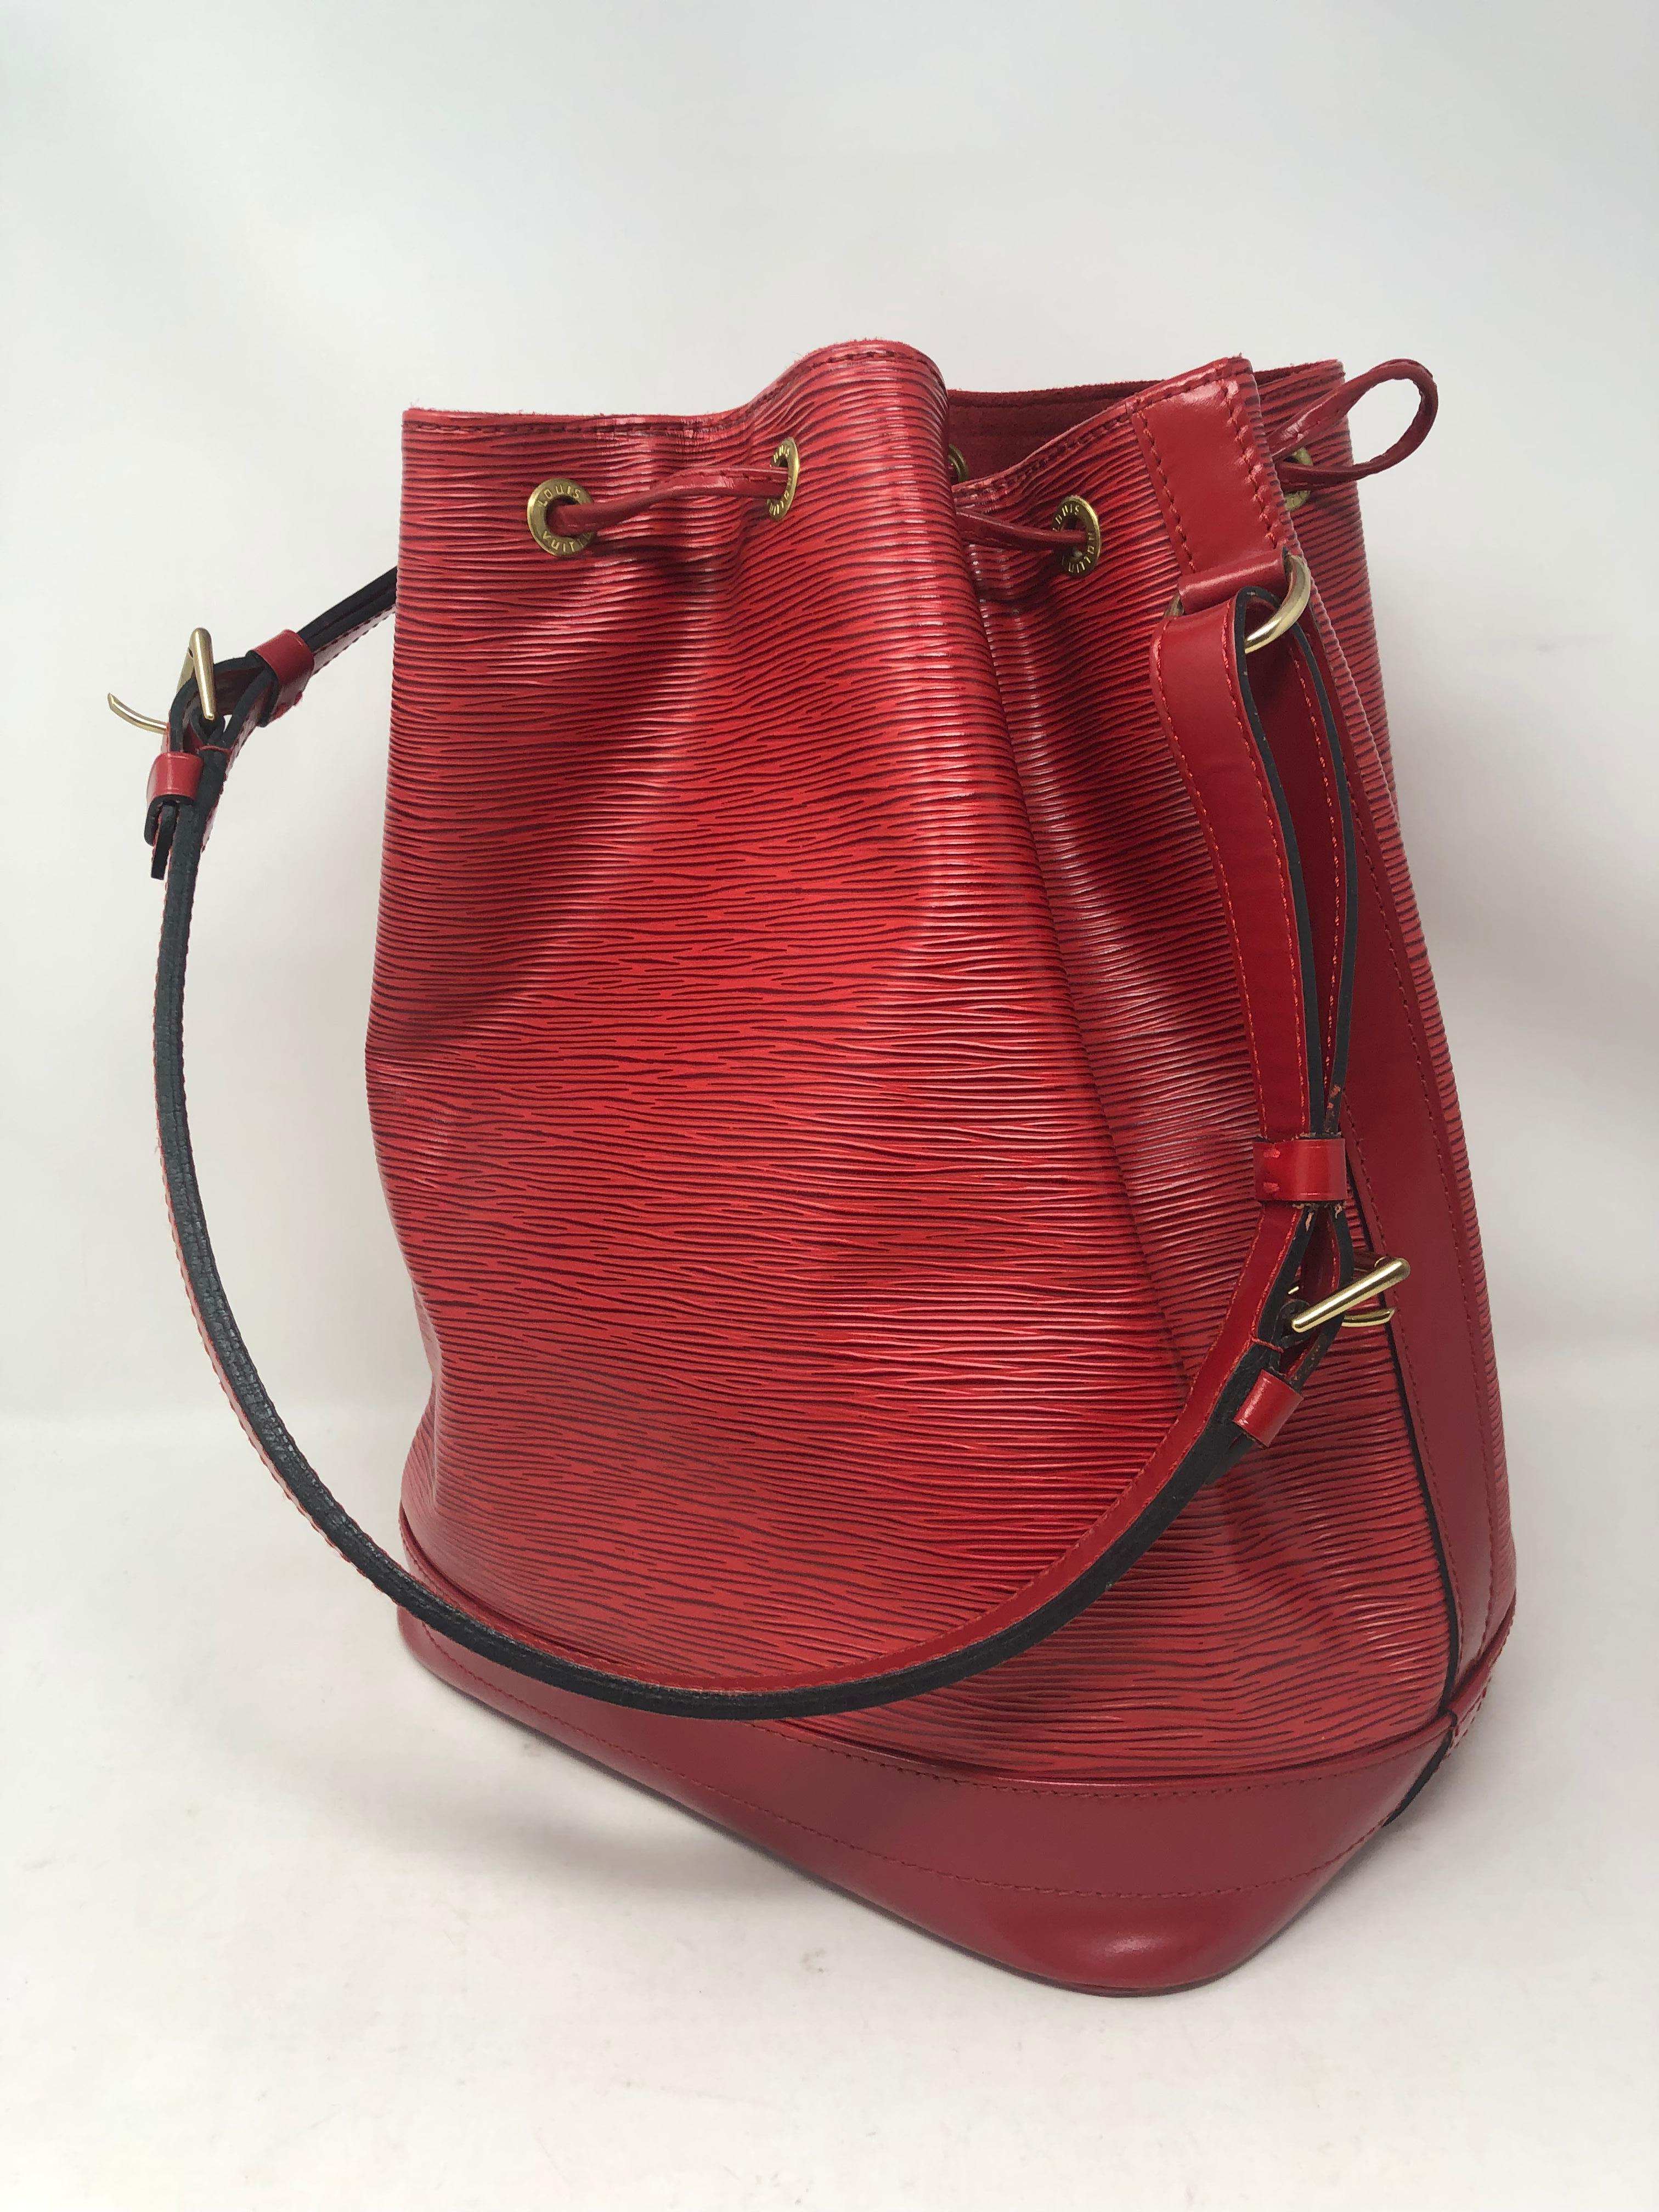 Louis Vuitton Red Epi Noe Bag. Larger size bucket style bag. Red epi leather is durable and in excellent condition. Retired color from LV. Own this beautiful bag today. Guaranteed authentic. 